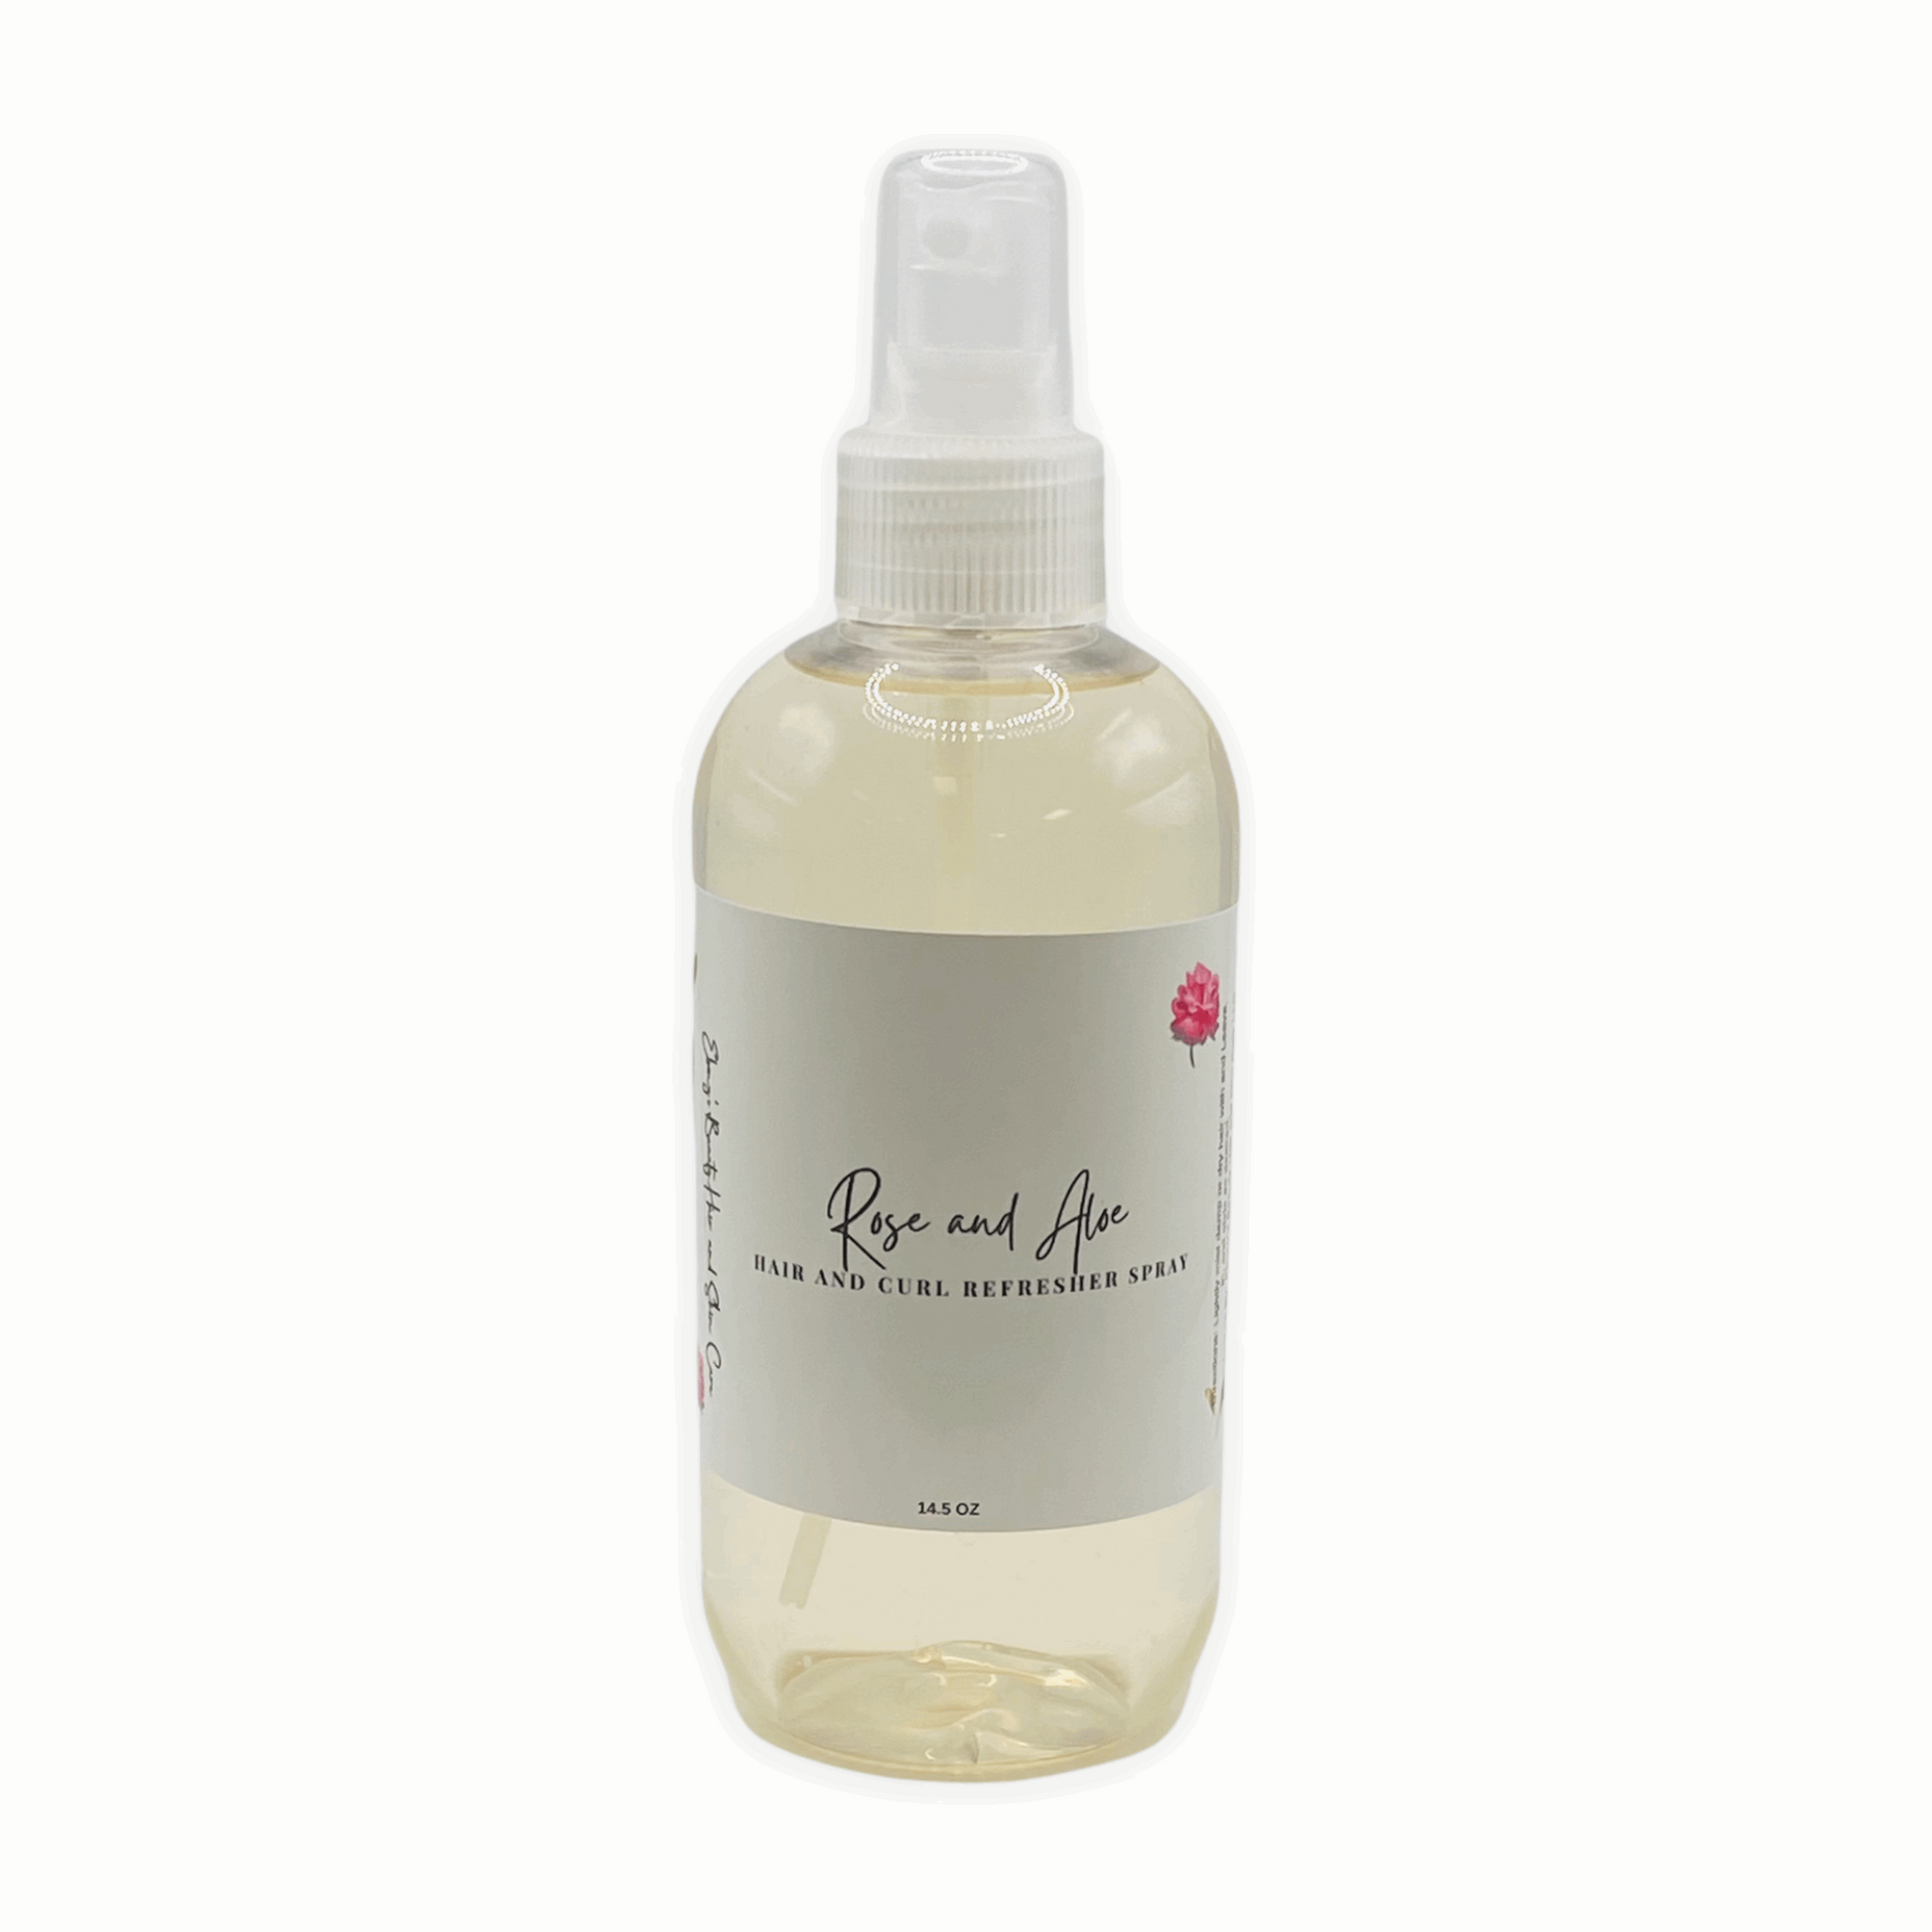 Ebony's Aloe and Rose Hair Curl Refresher Spray Strengthening, Anti-Breakage, Curl Enhancing, For curl types: 2B, 2C, 3A, 3B, 3C, 4A, 4B, 4C. Perfect for weak, breakage-prone hair.